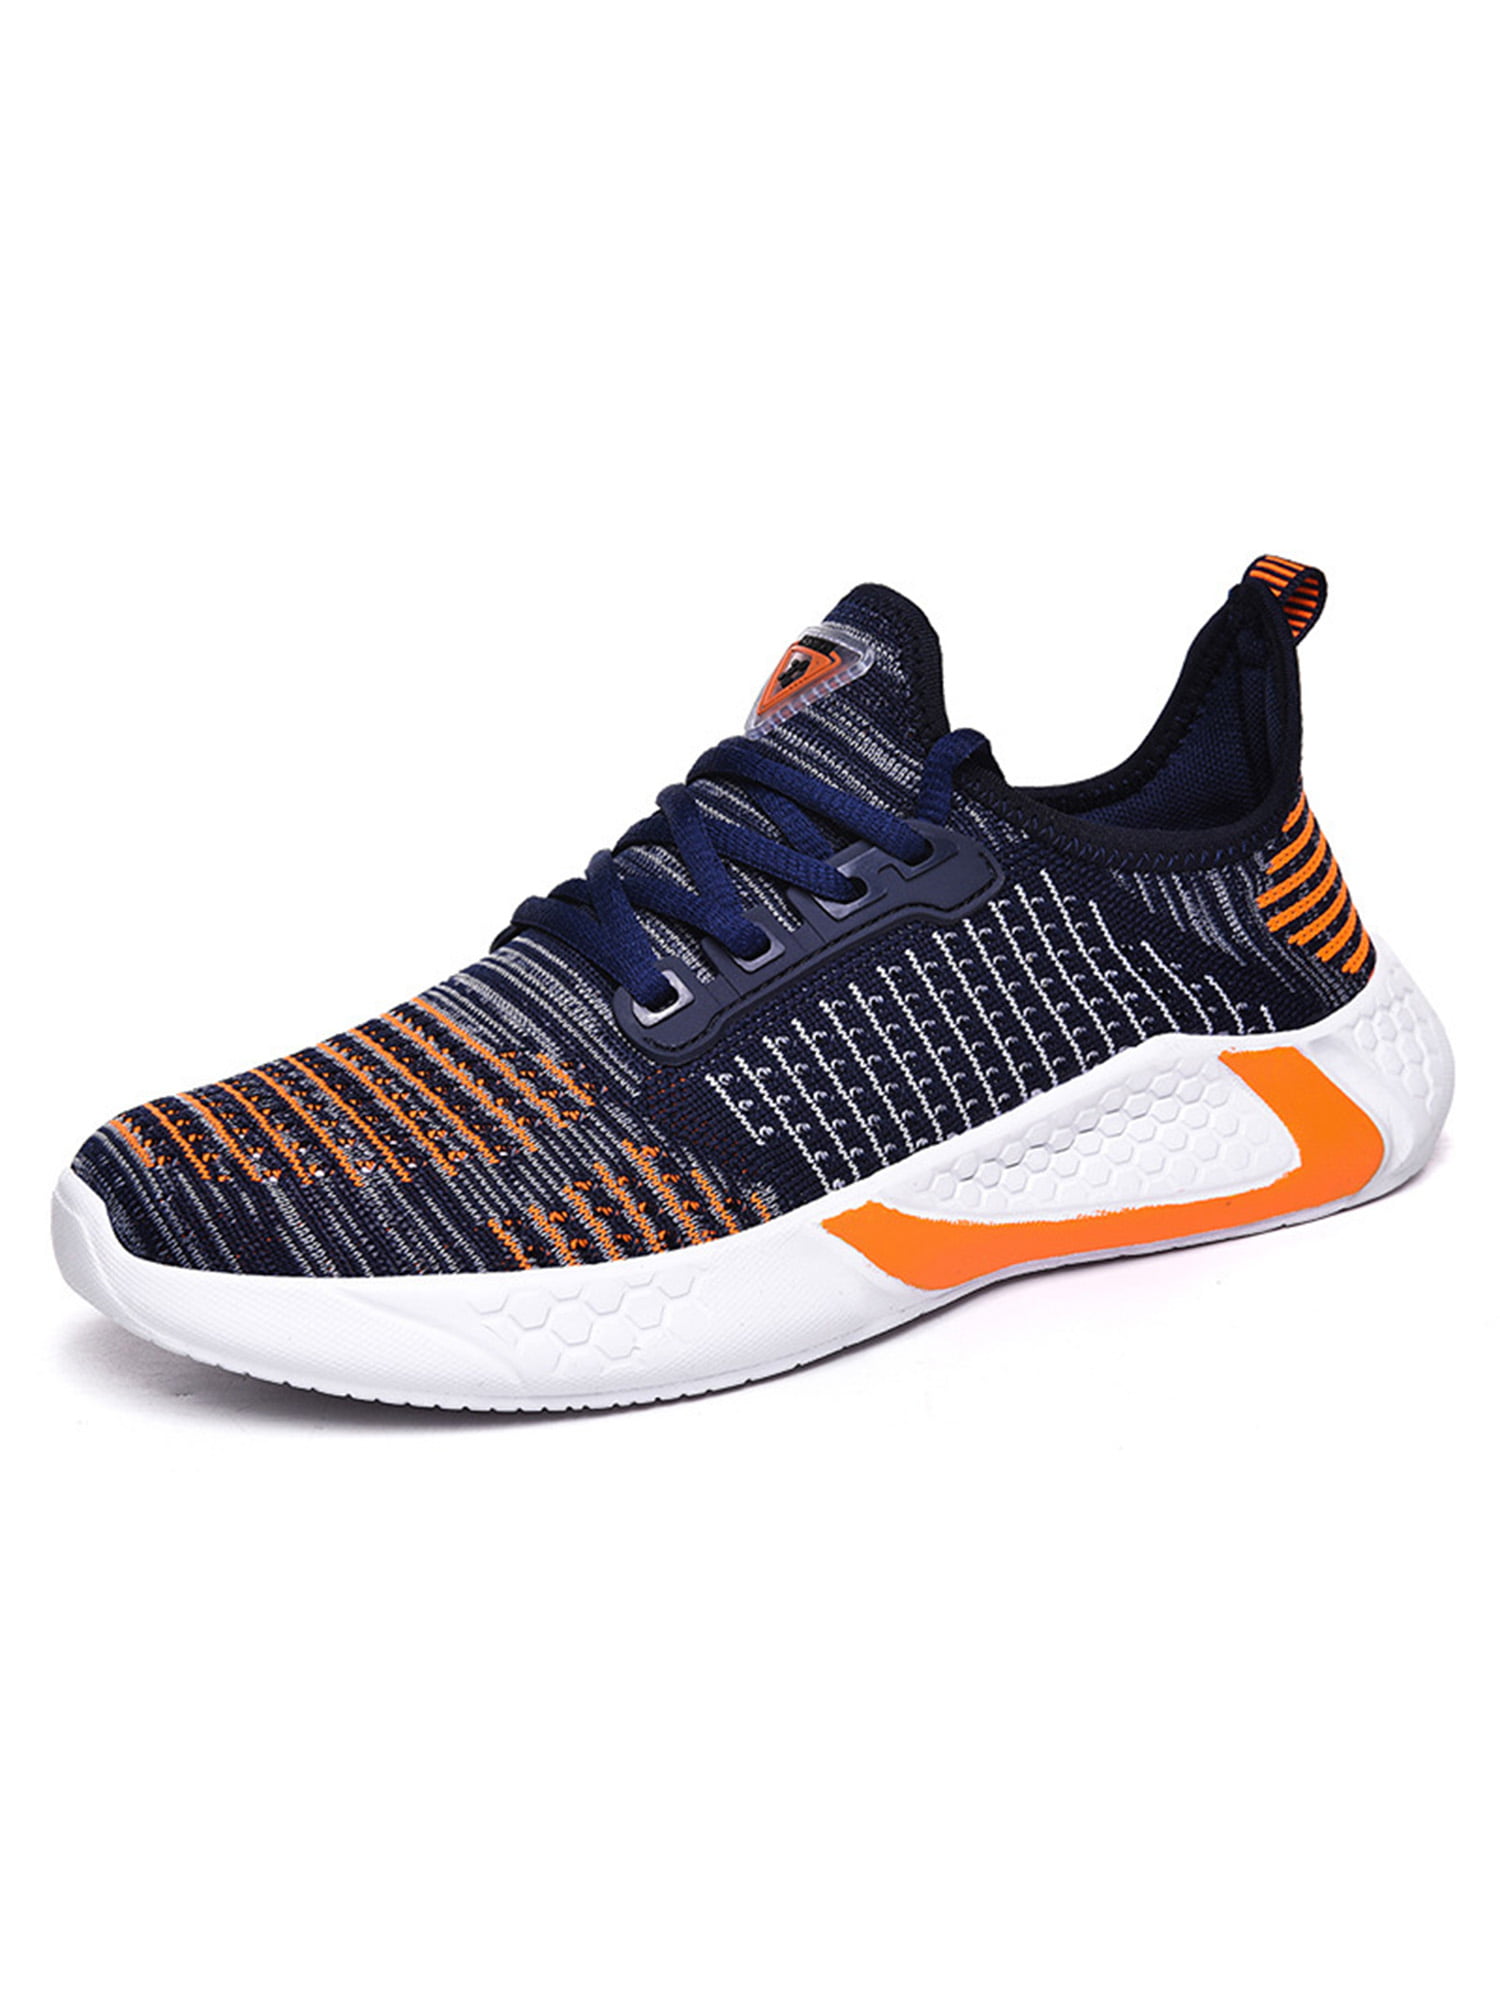 Men’s Sports Sneakers Casual Running Shoes Athletic Outdoor Breathable Jogging a